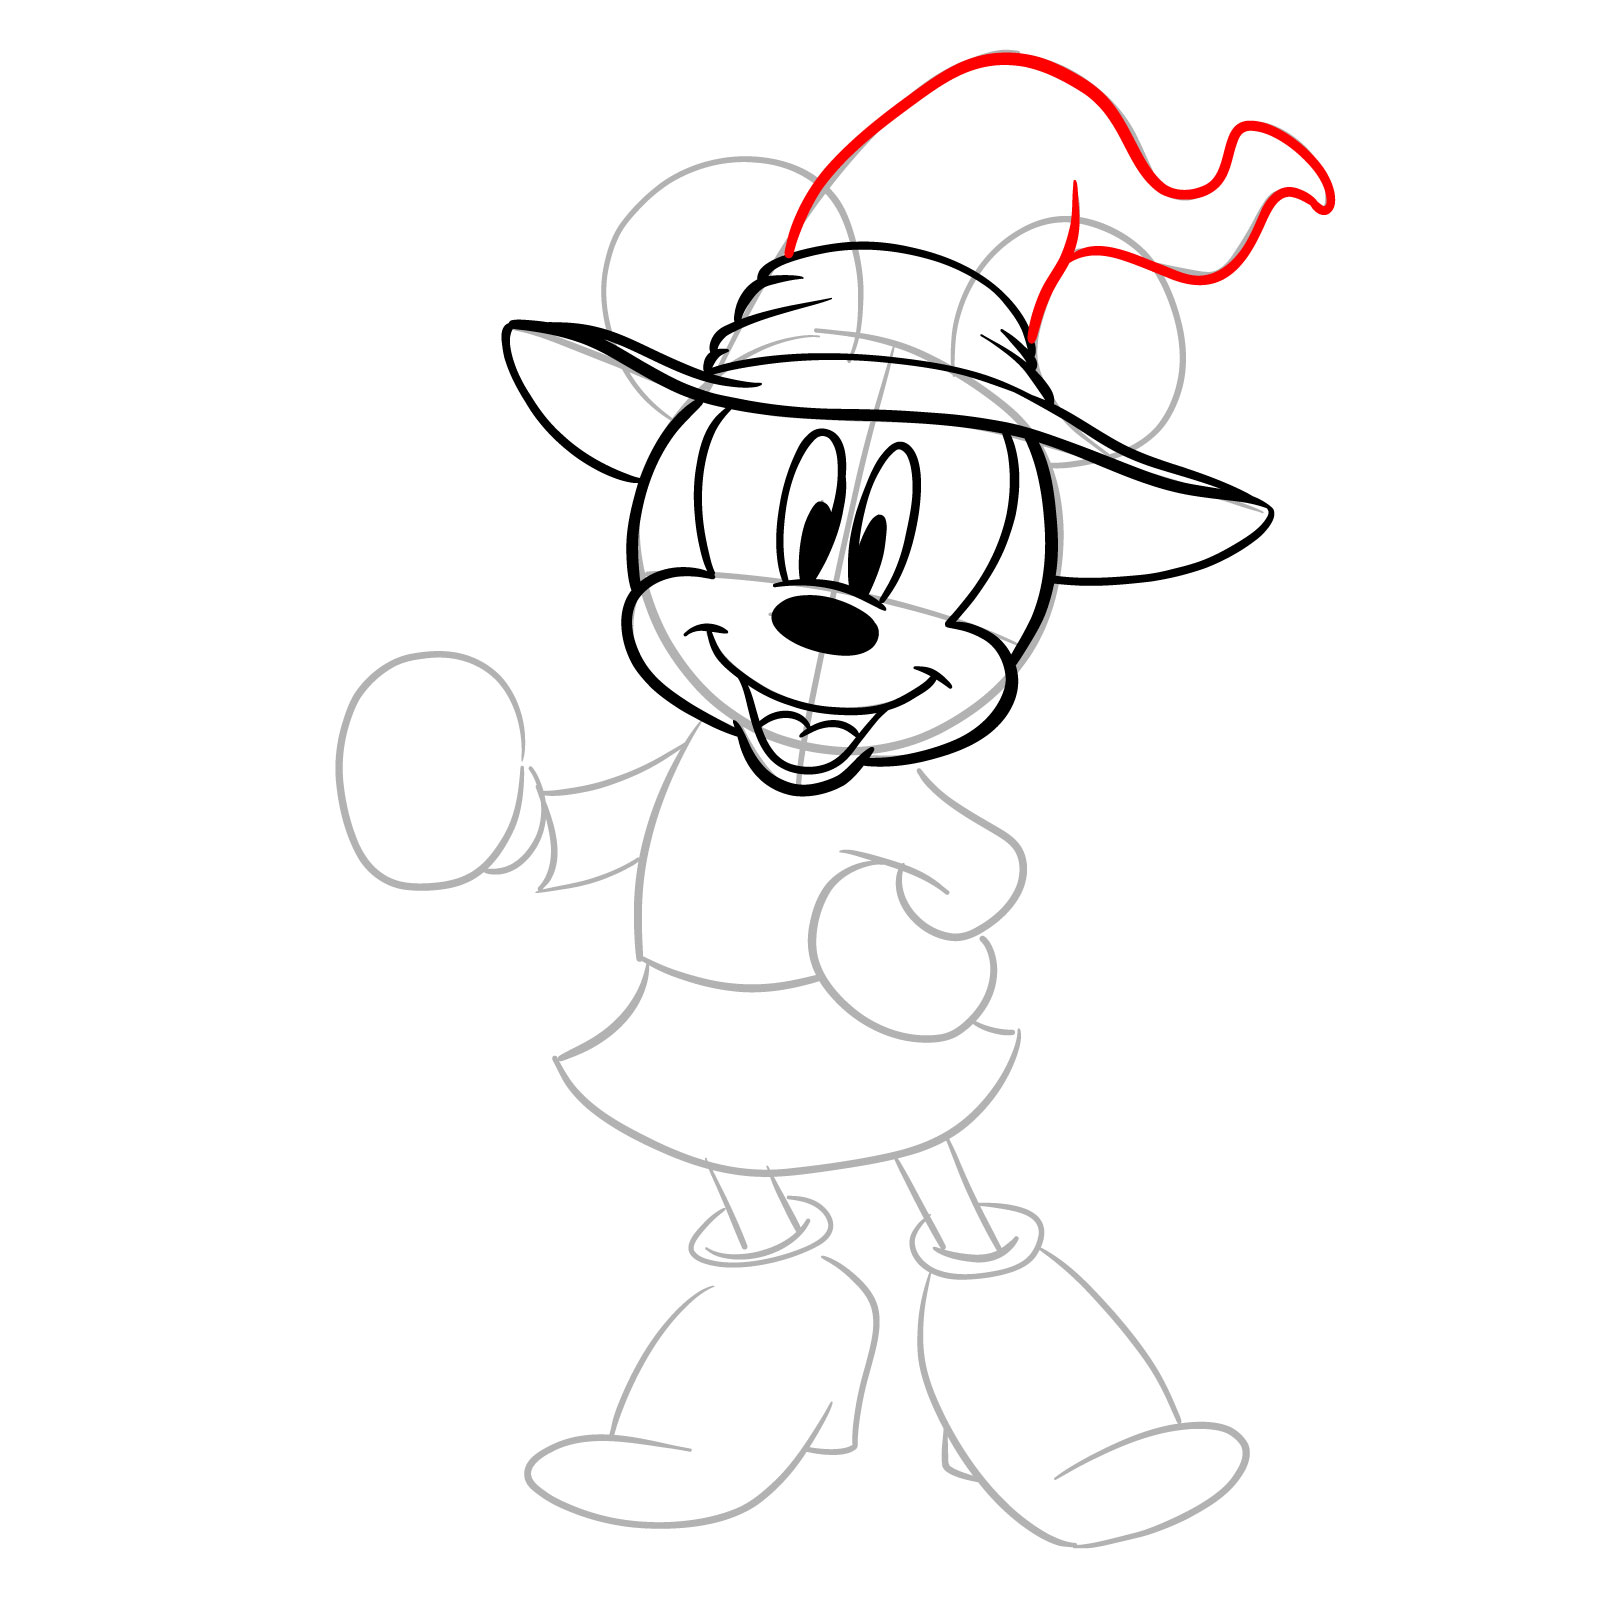 How to draw Halloween Minnie Mouse as a witch - step 11